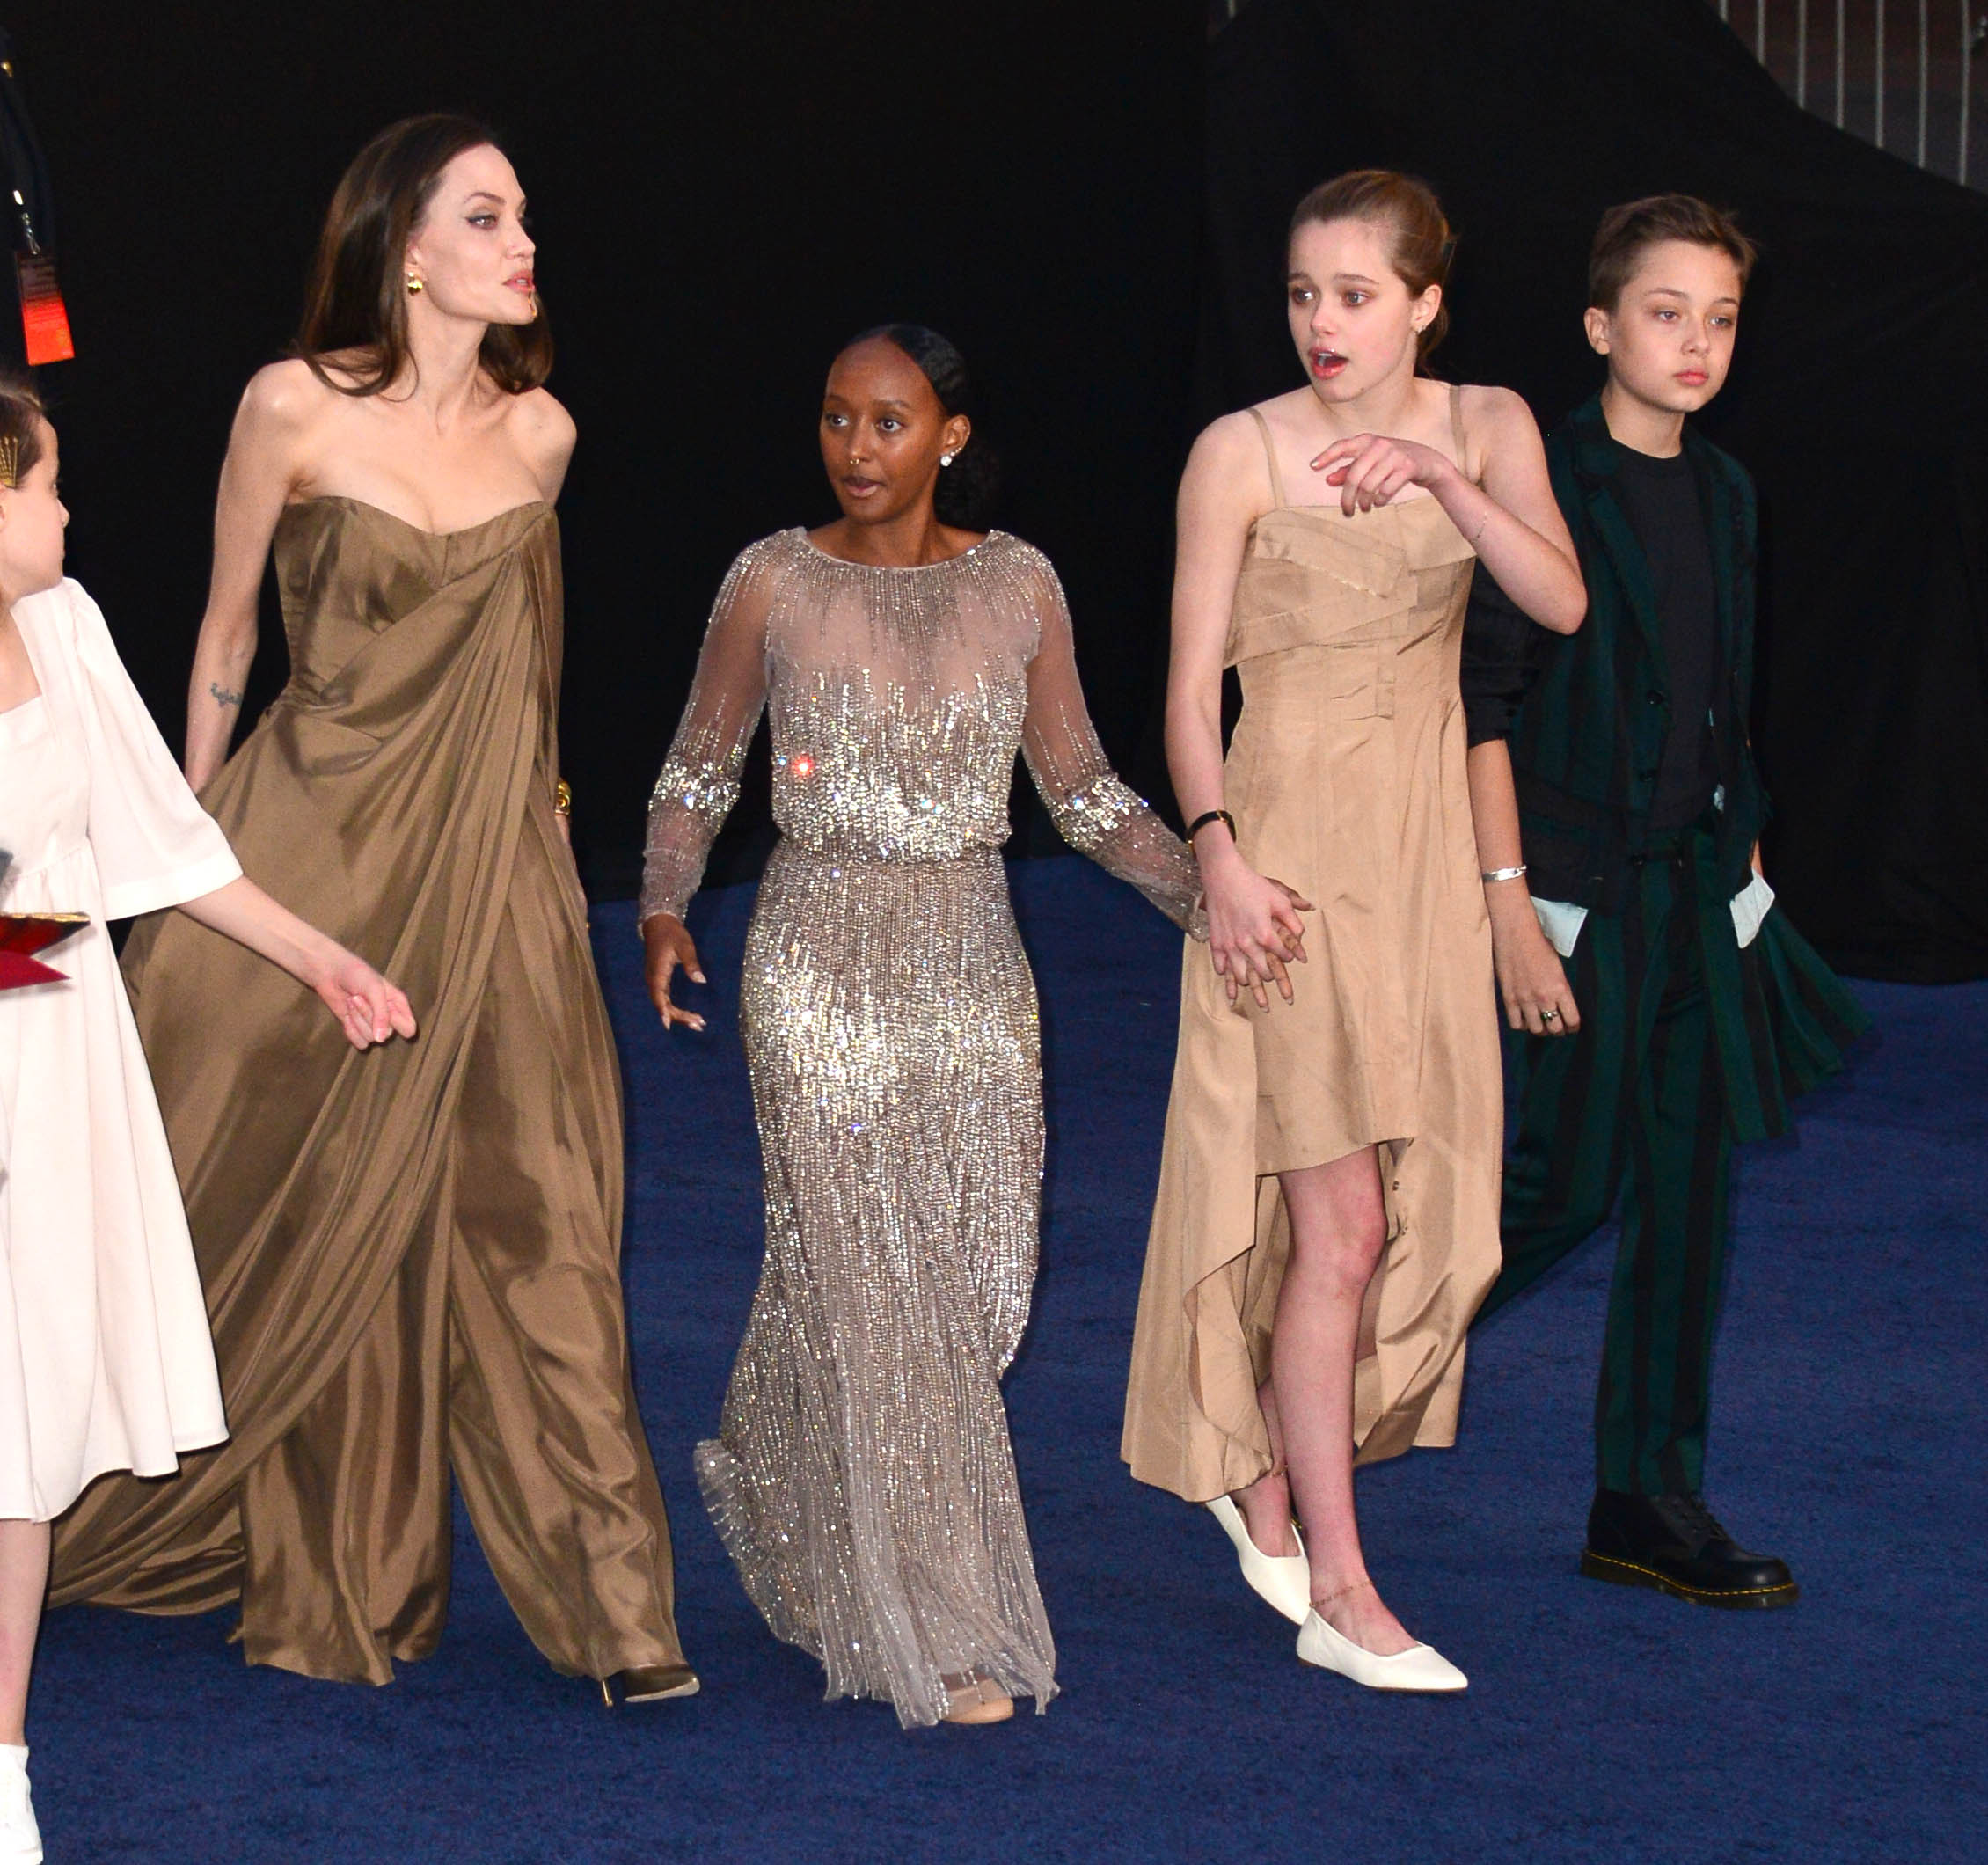 Angelina Jolie and her children Zahara, Shiloh, and Knox Jolie in Los Angeles in 2021. | Source: Getty Images